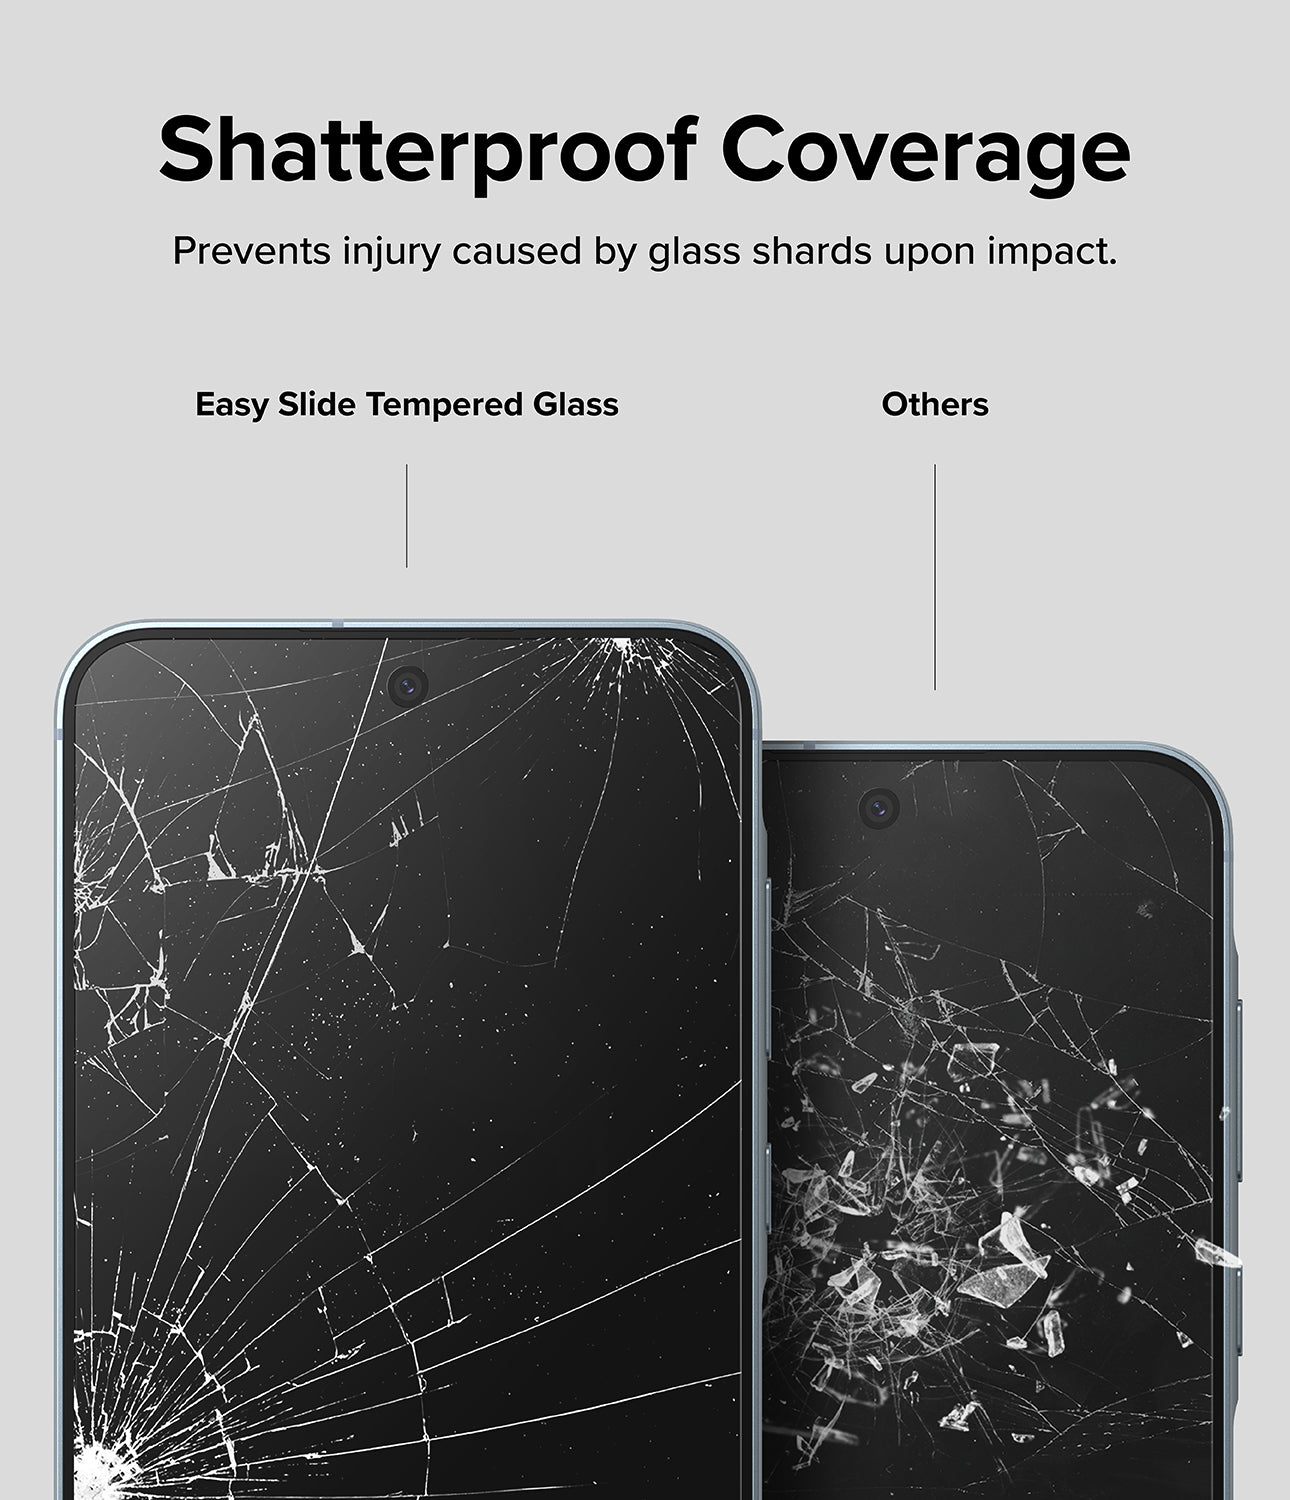 Galaxy A55 Screen Protector | Easy Slide Tempered Glass - Shatterproof Coverage. Prevents injury caused by glass shards upon impact.